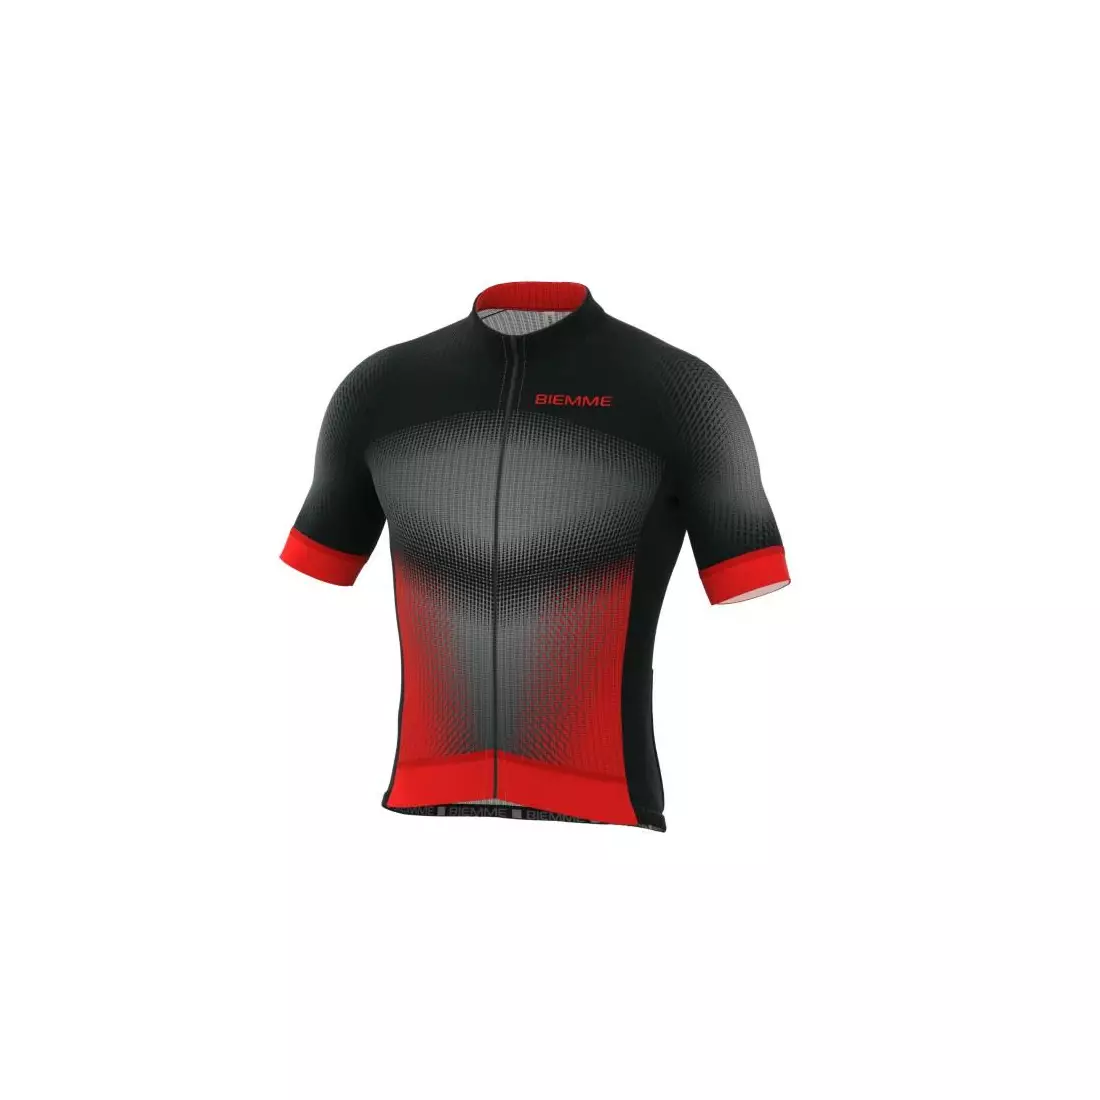 Biemme men's cycling jersey ZONCOLAN black and red